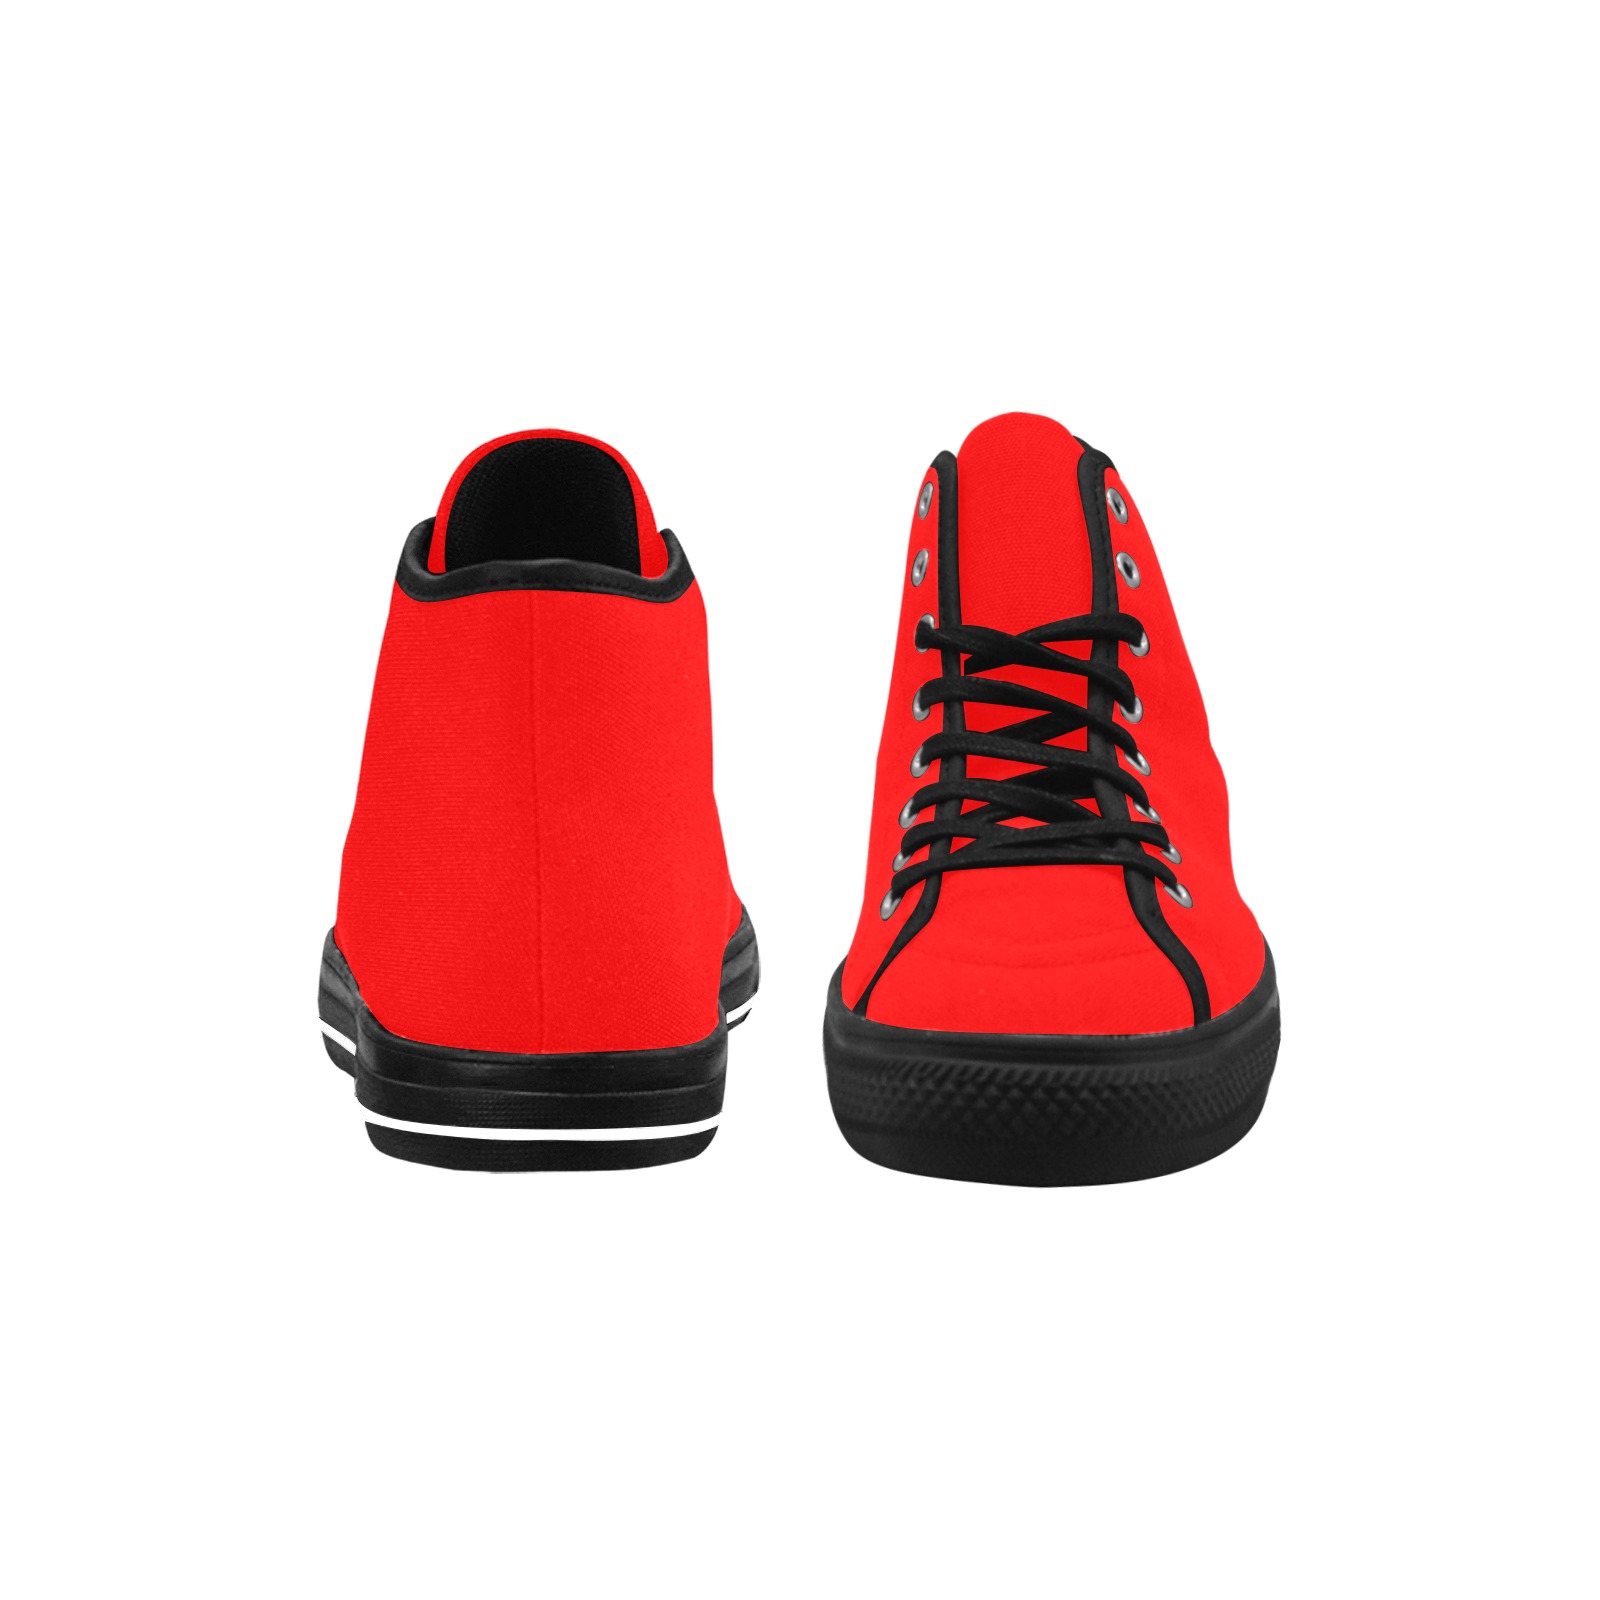 Merry Christmas Red Solid Color Vancouver H Women's Canvas Shoes (1013-1)